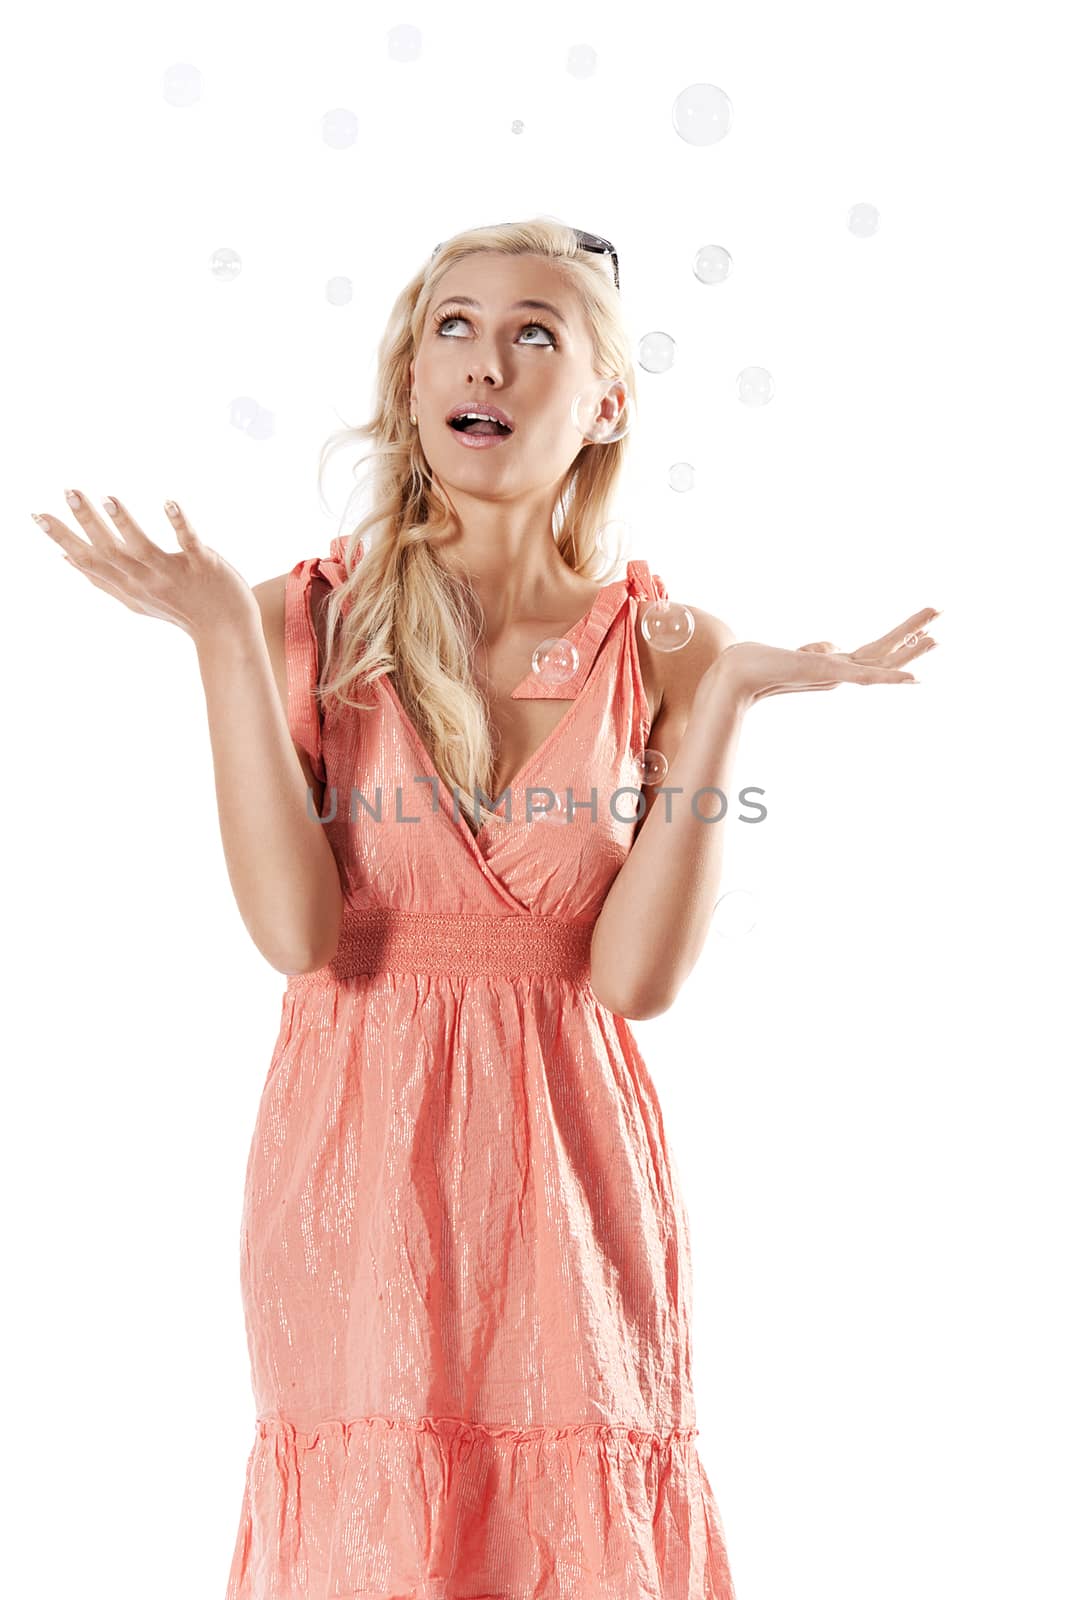 blond beautiful girl standing against white background looking t by fotoCD